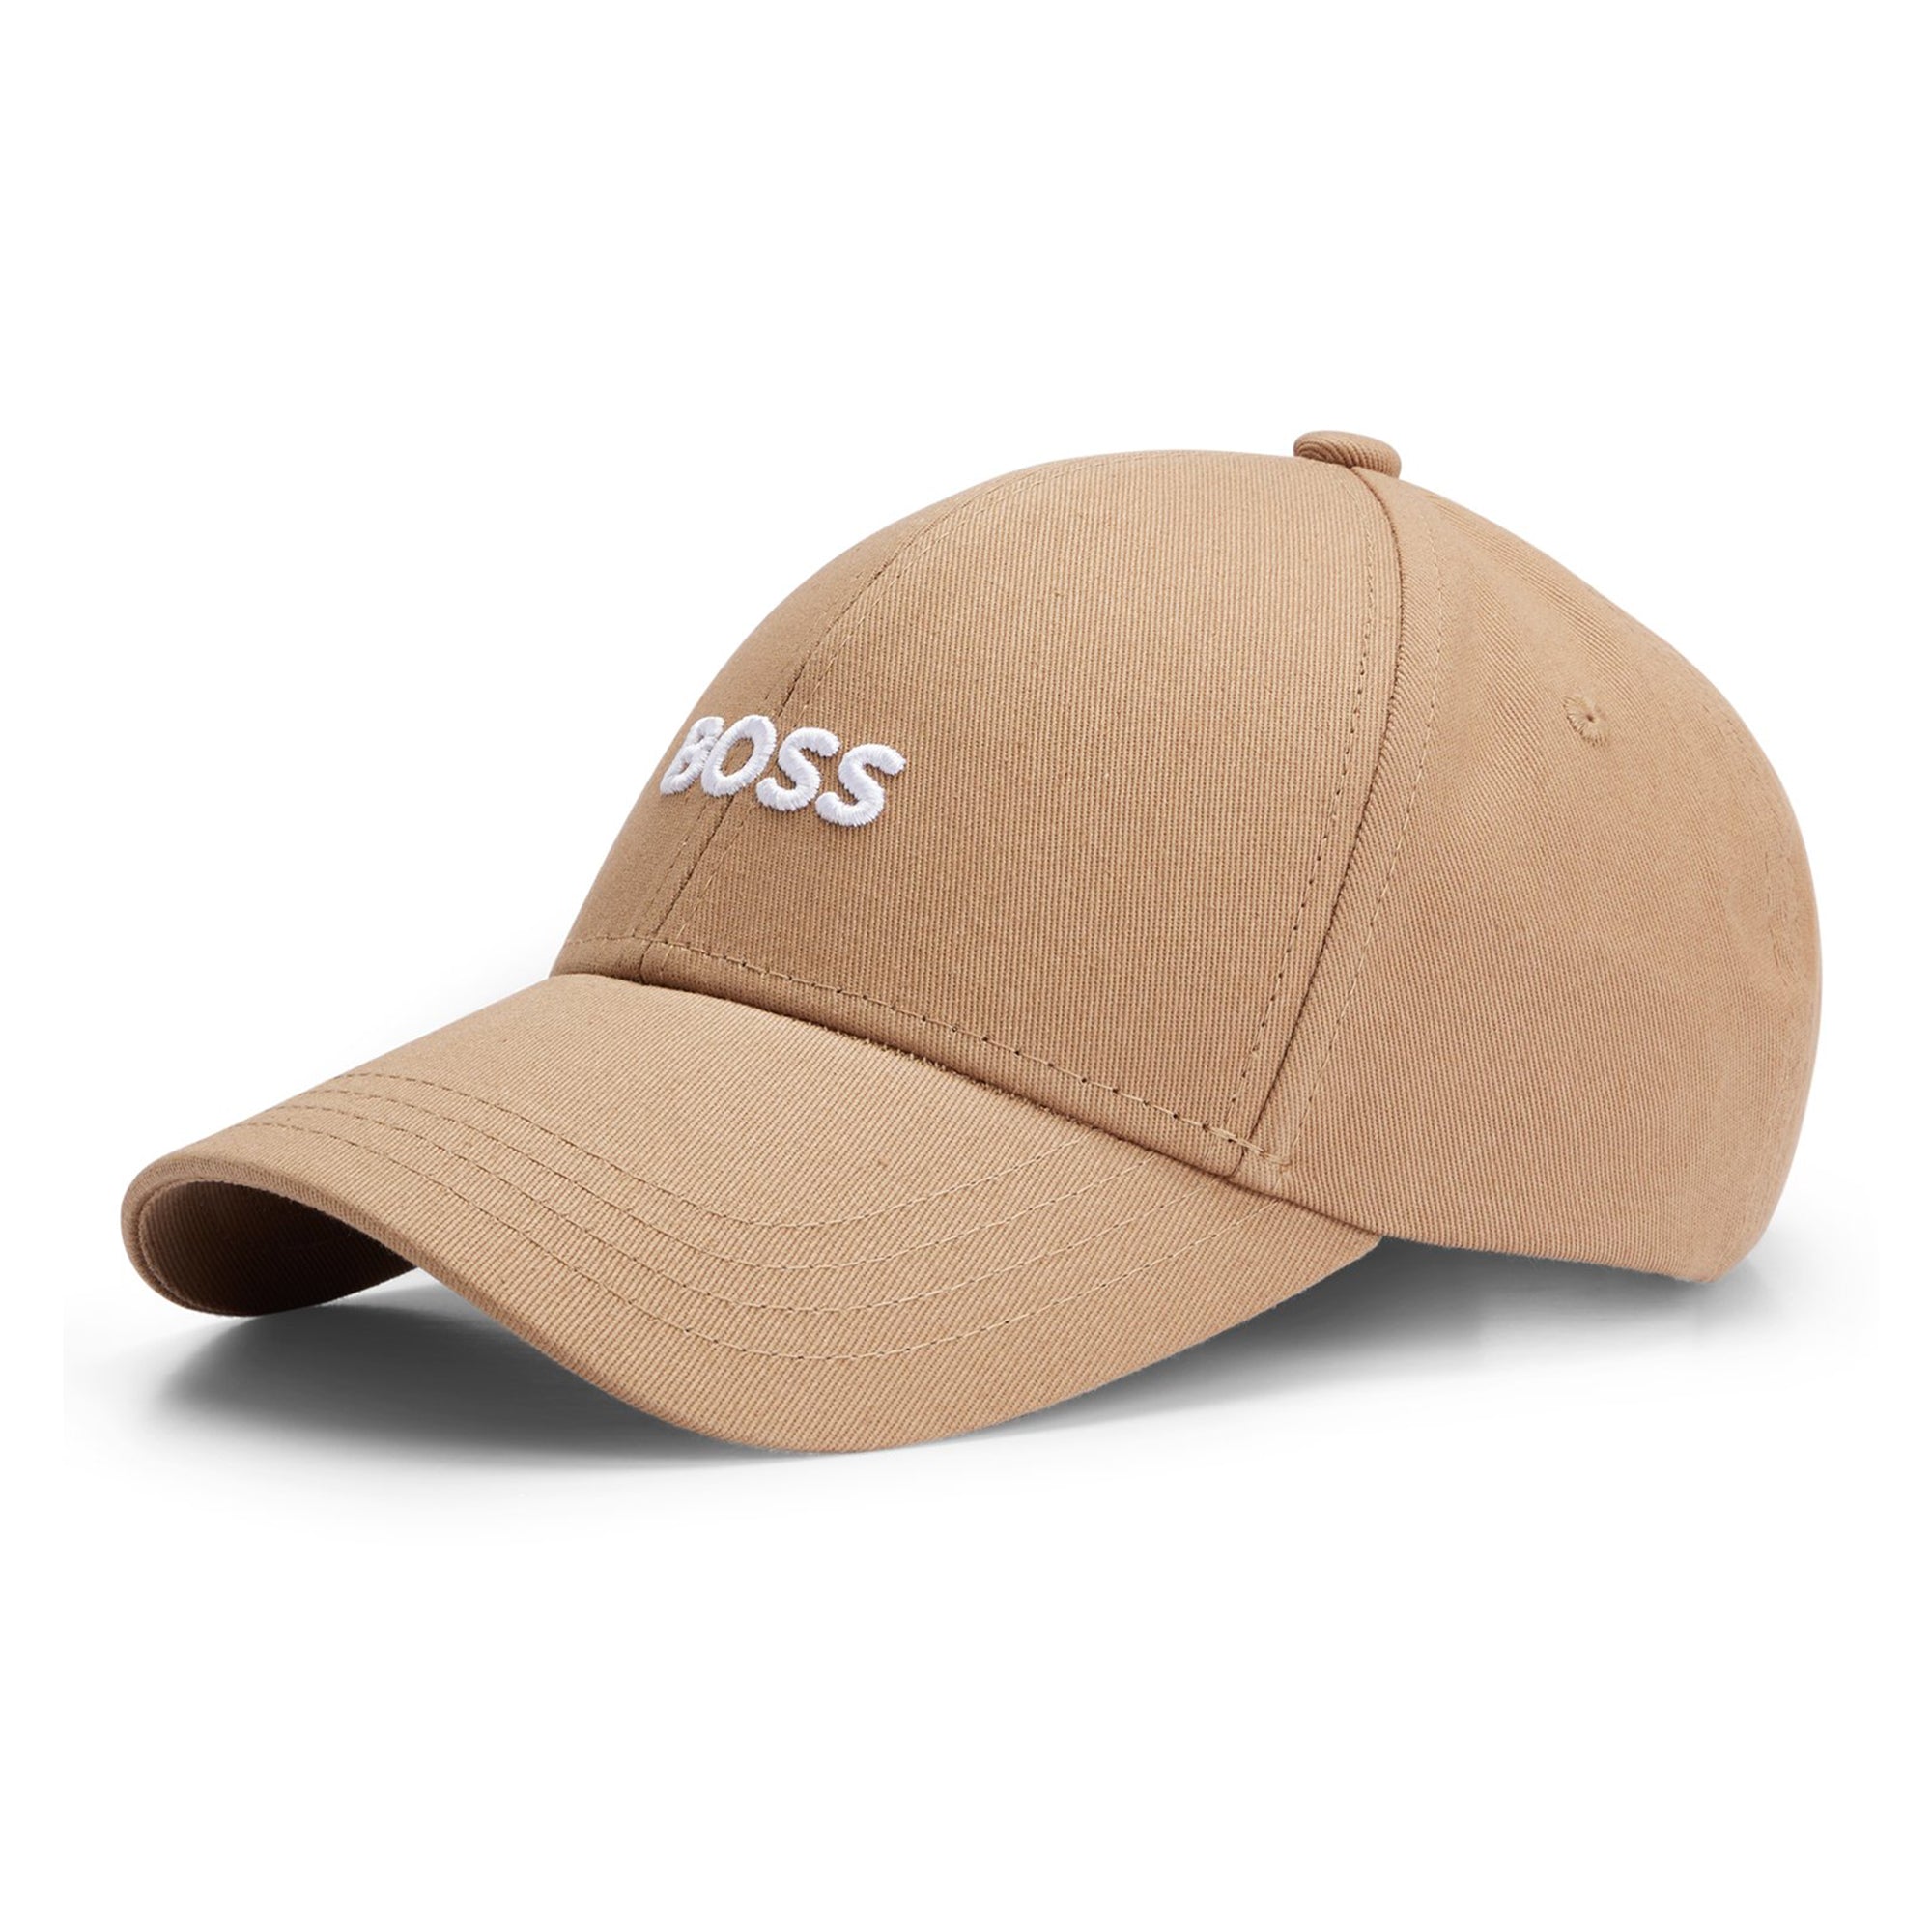 Embroidered Boss - Cotton Cap Zed Beige